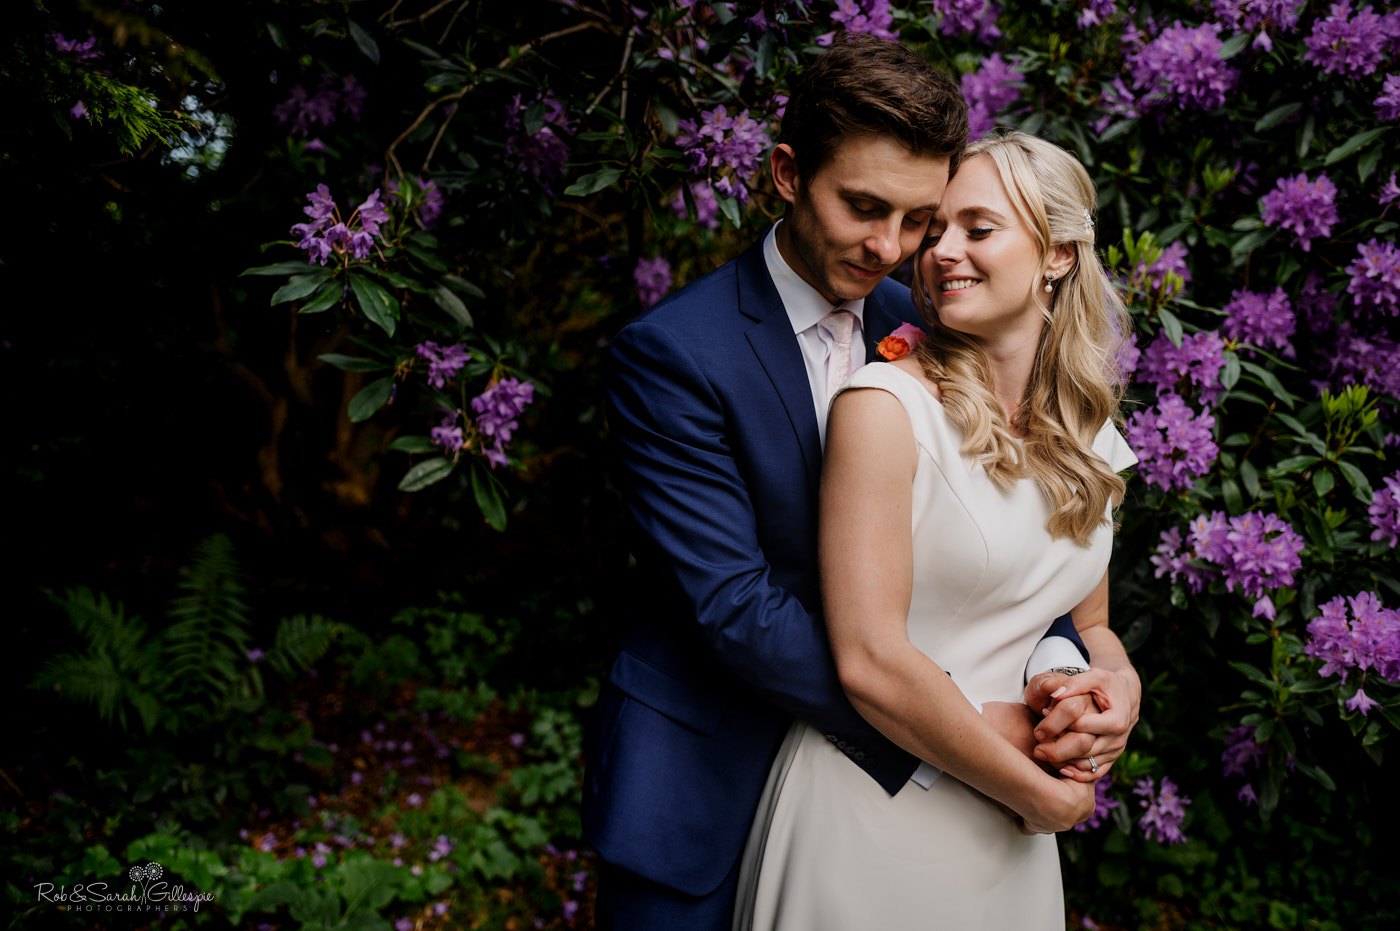 Bride and groom cuddle up surrounded by purple flowers